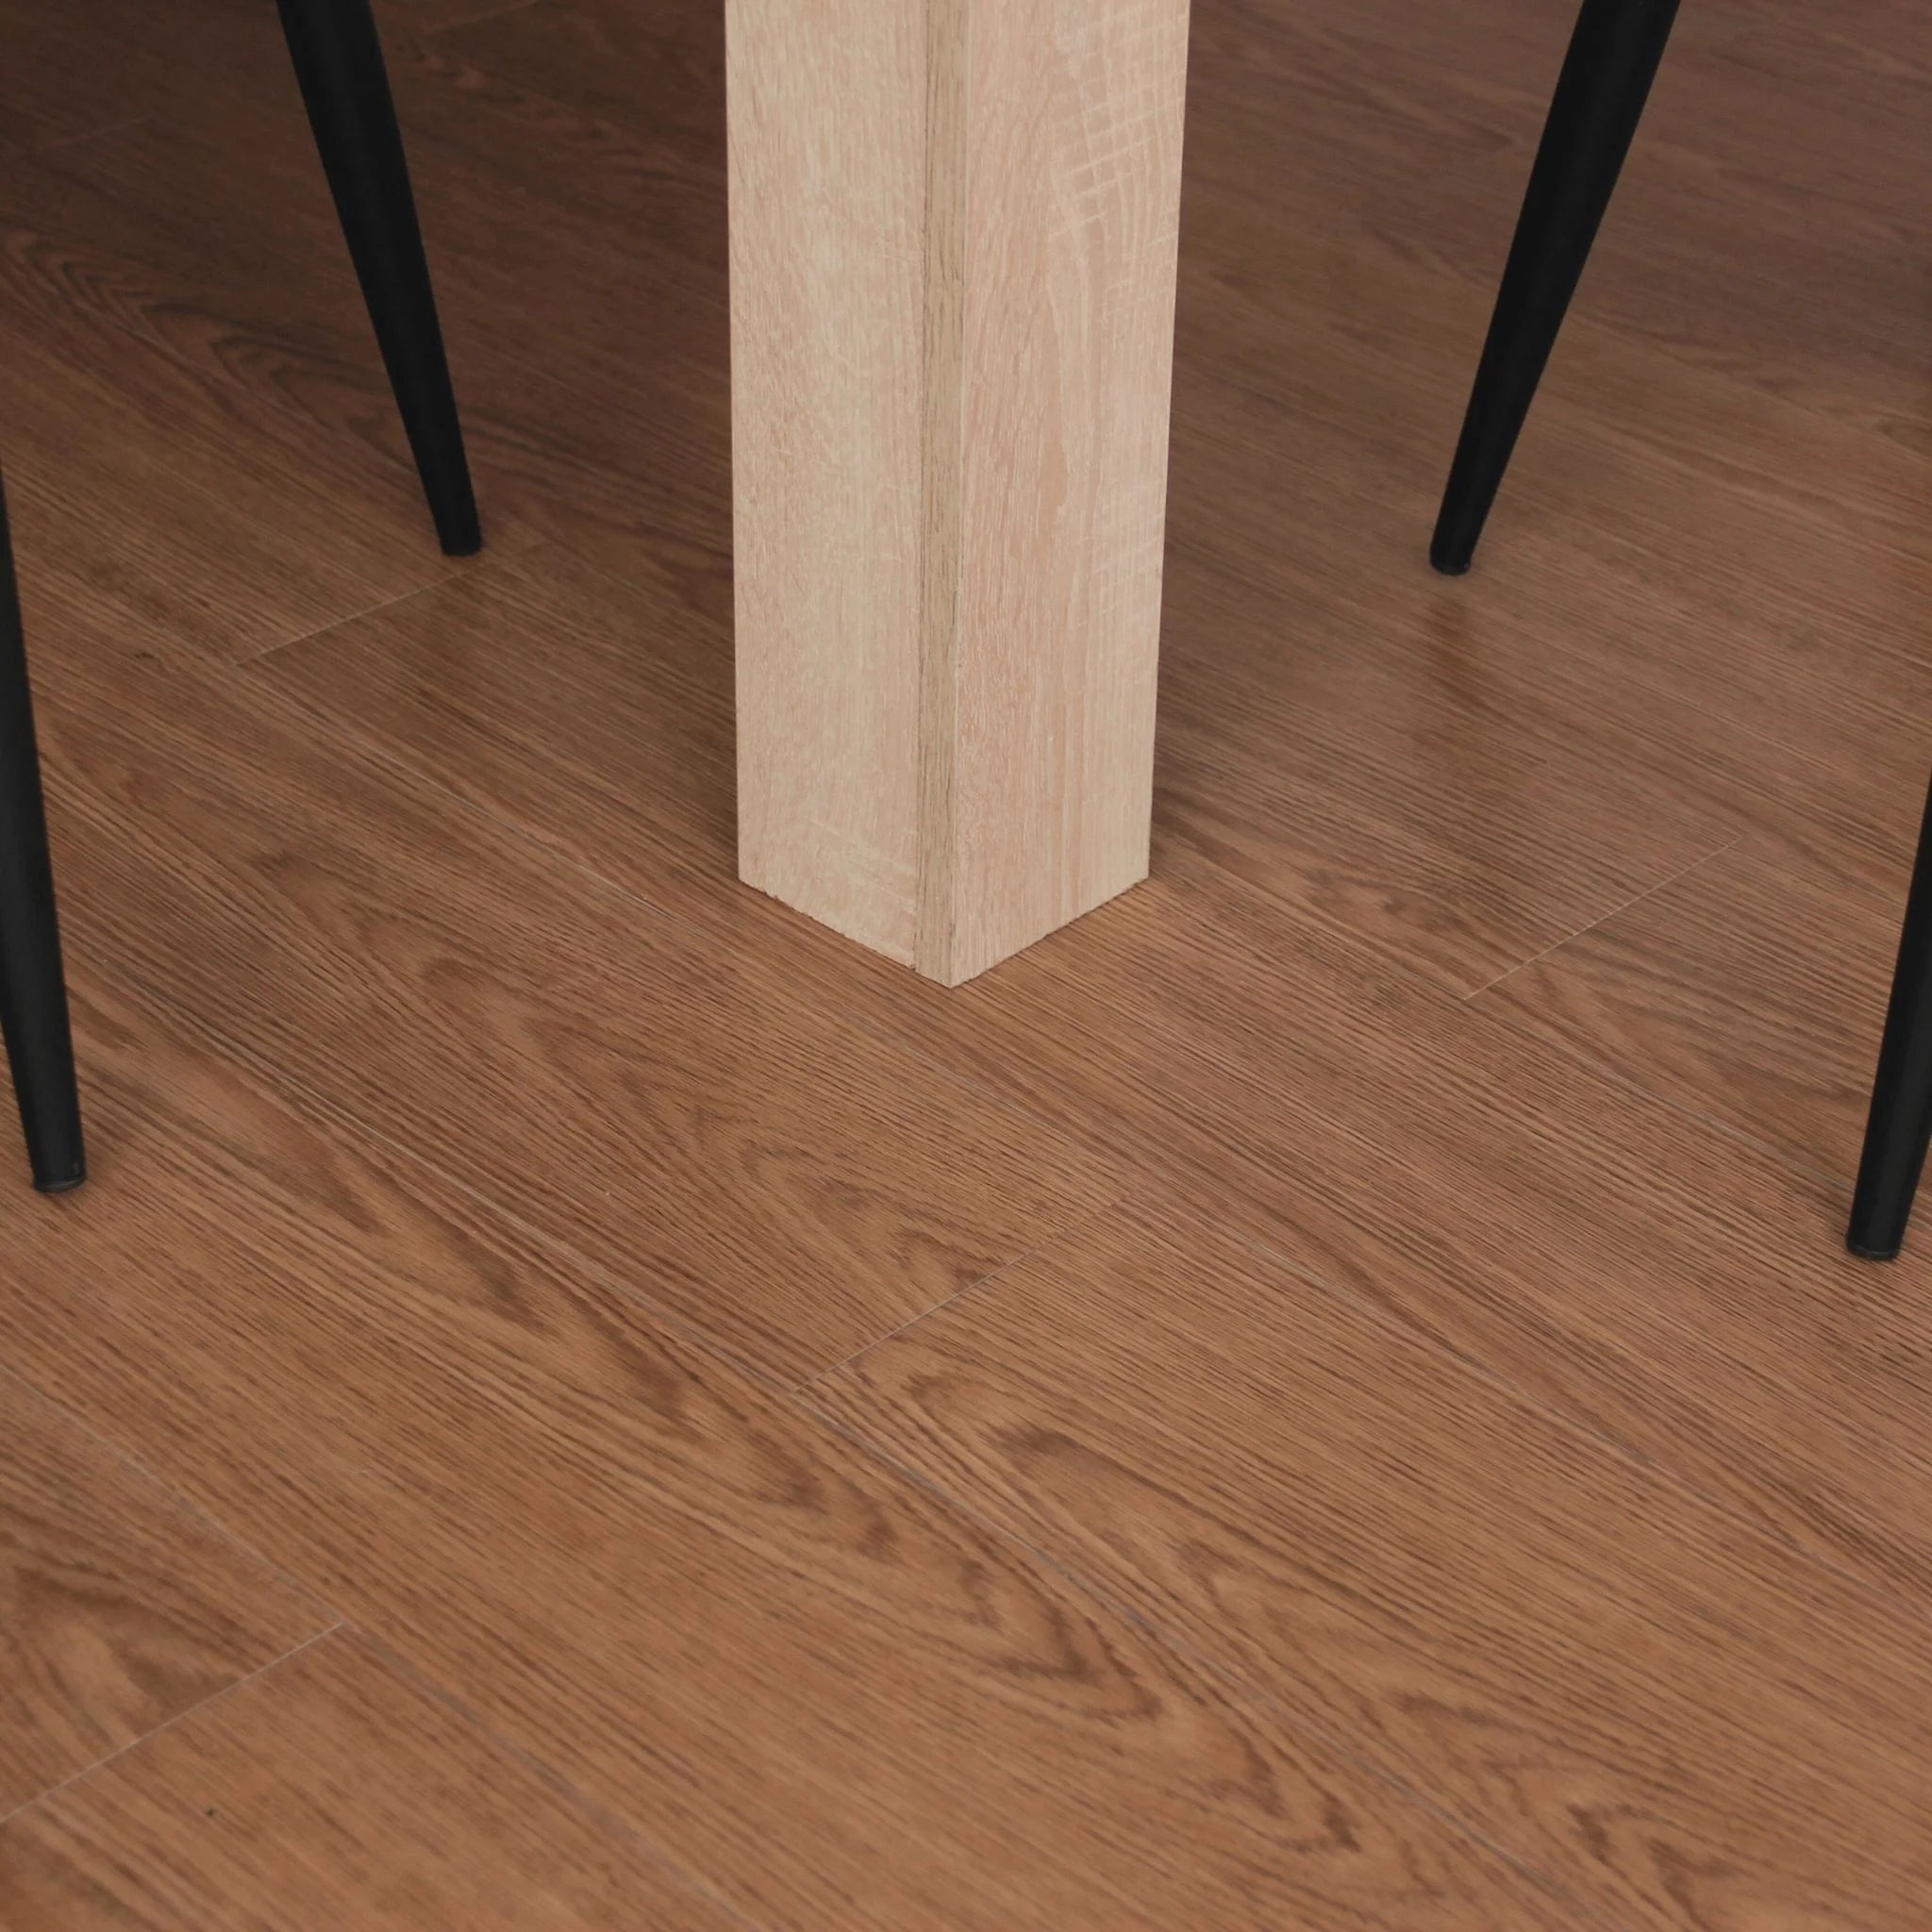 light brown wood effect vinyl flooring under a table and black metal chairs